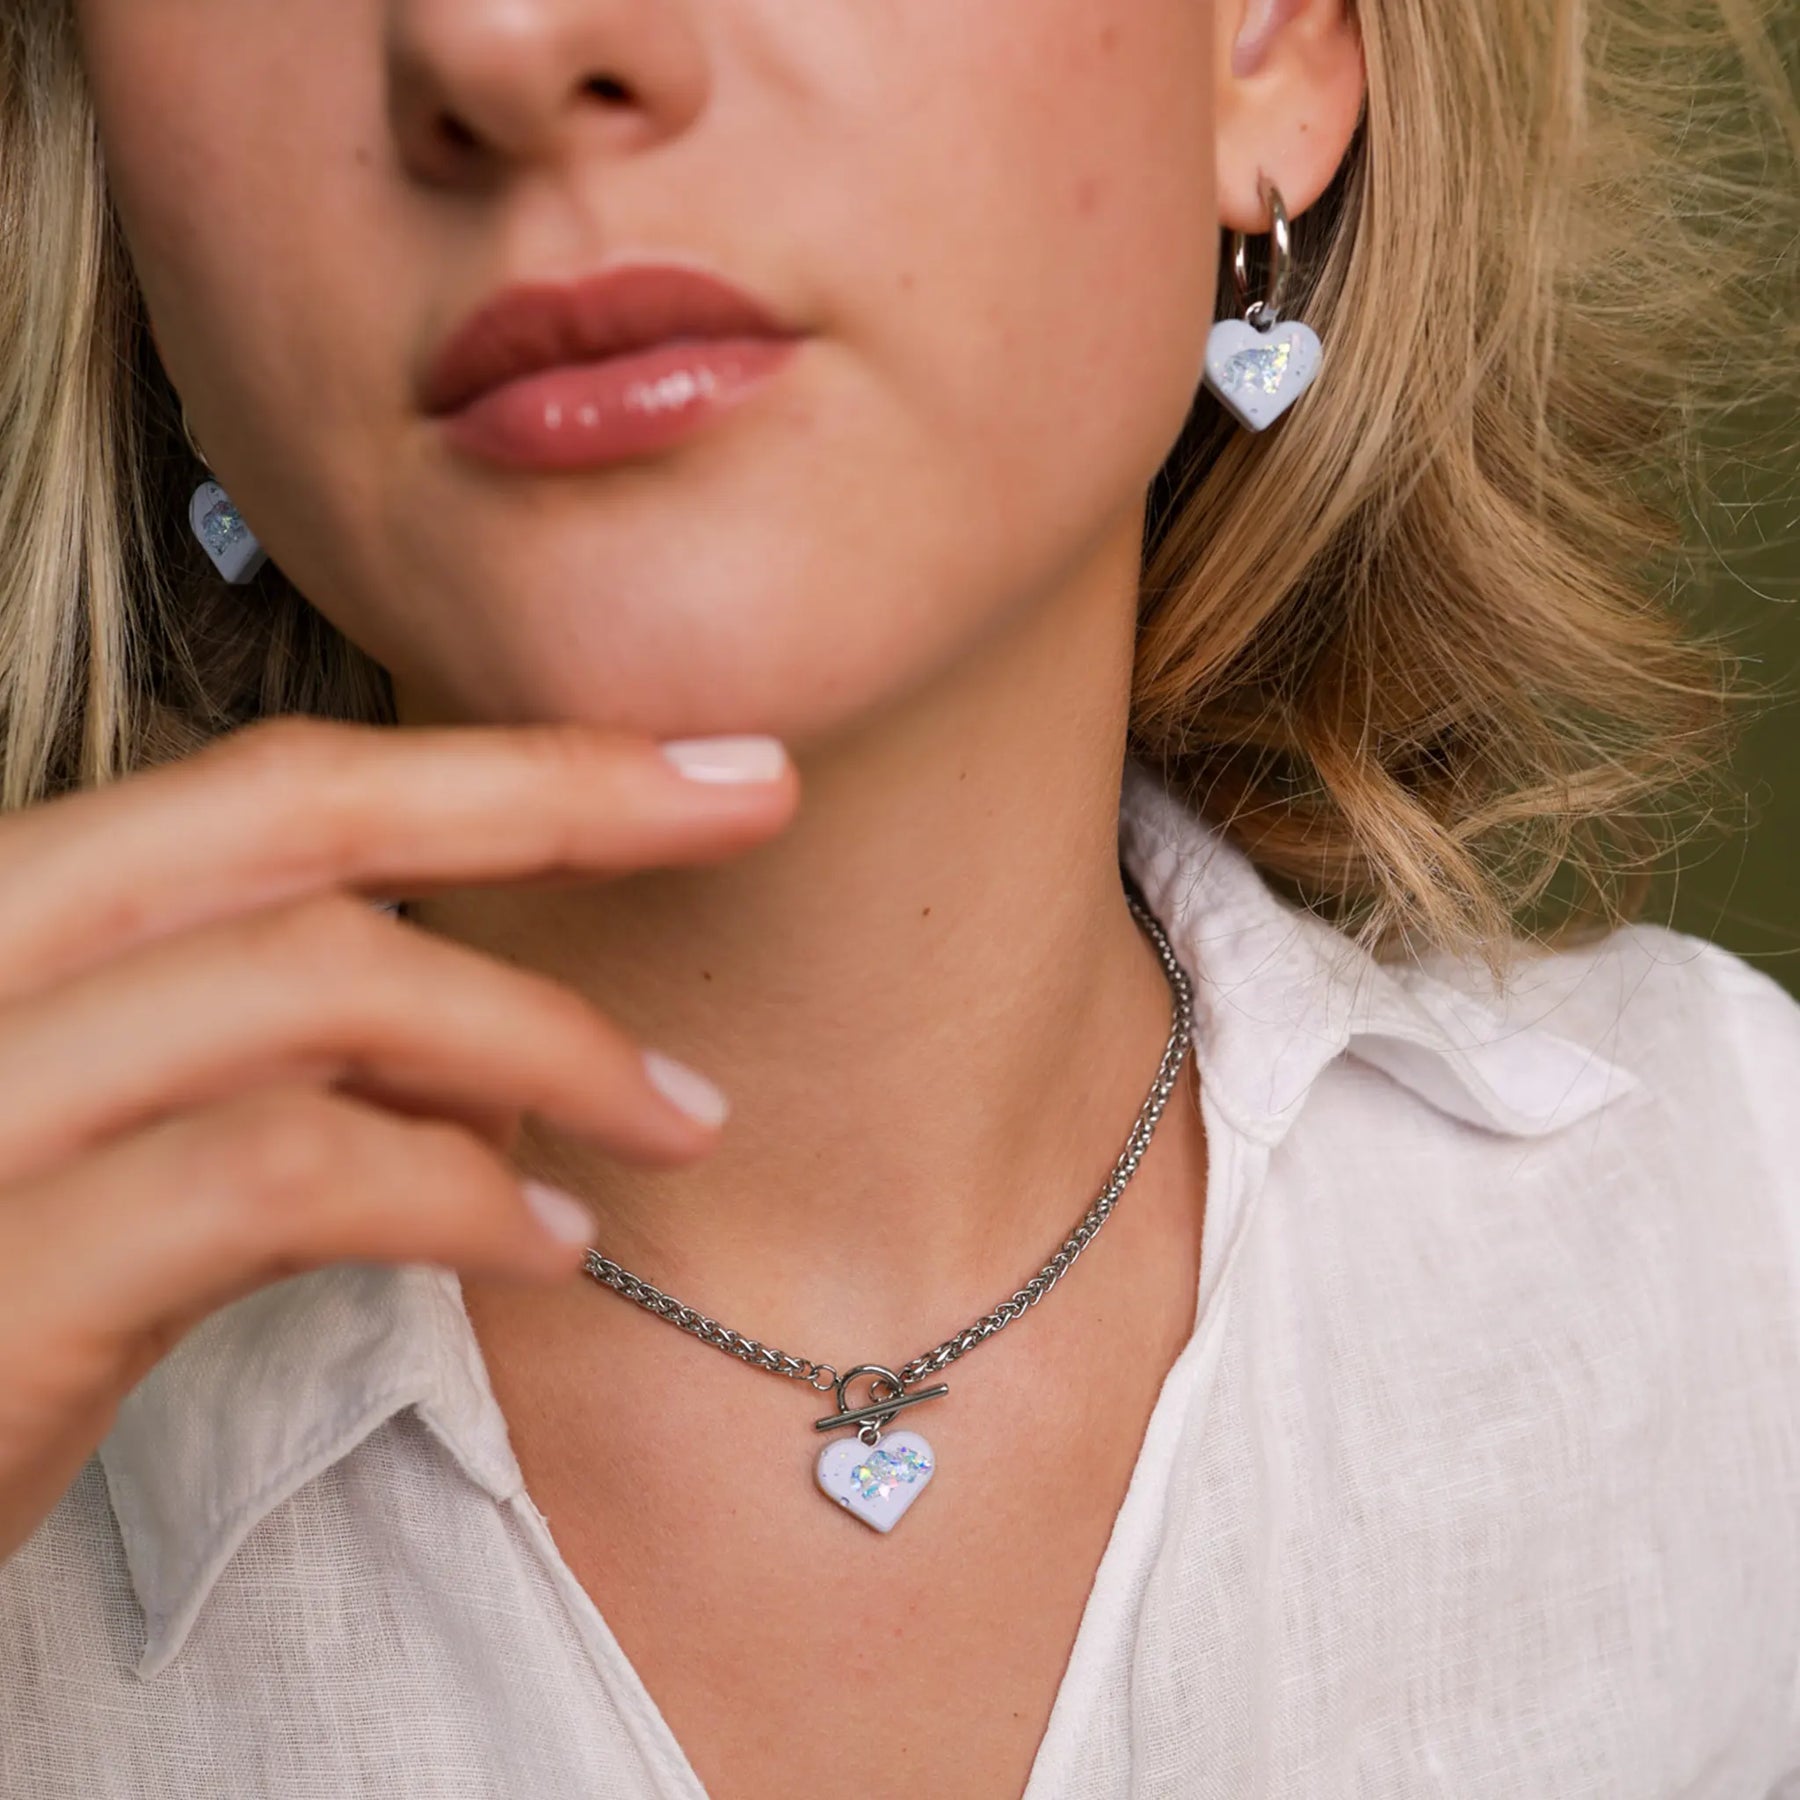 Heart Necklace AMY | 20" | Blue Crystal Silver